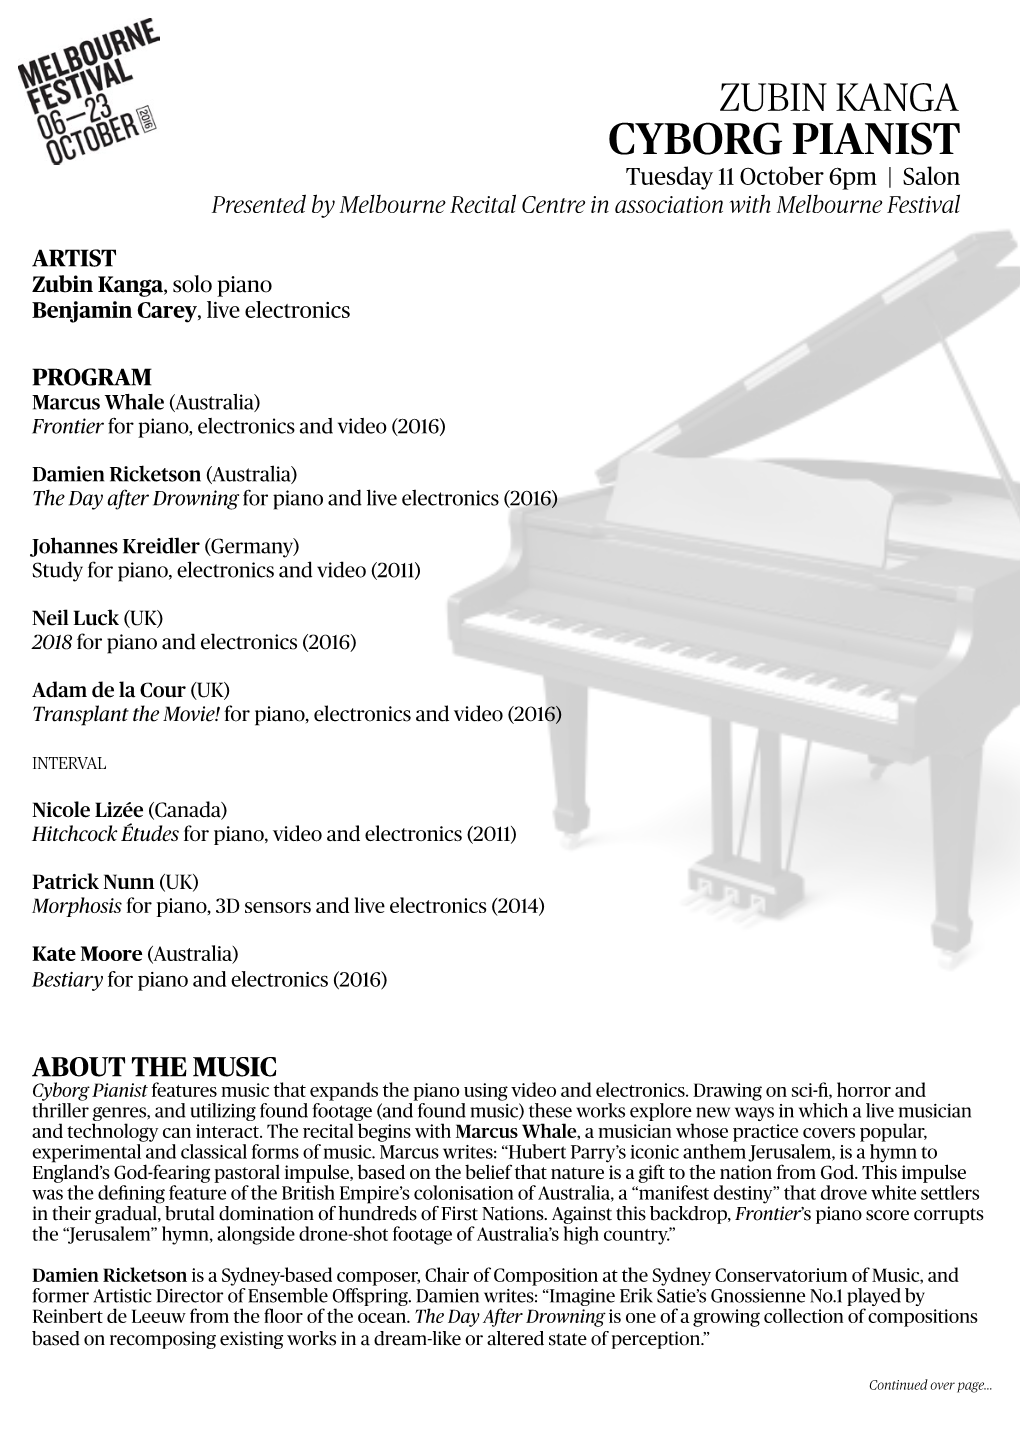 CYBORG PIANIST Tuesday 11 October 6Pm | Salon Presented by Melbourne Recital Centre in Association with Melbourne Festival